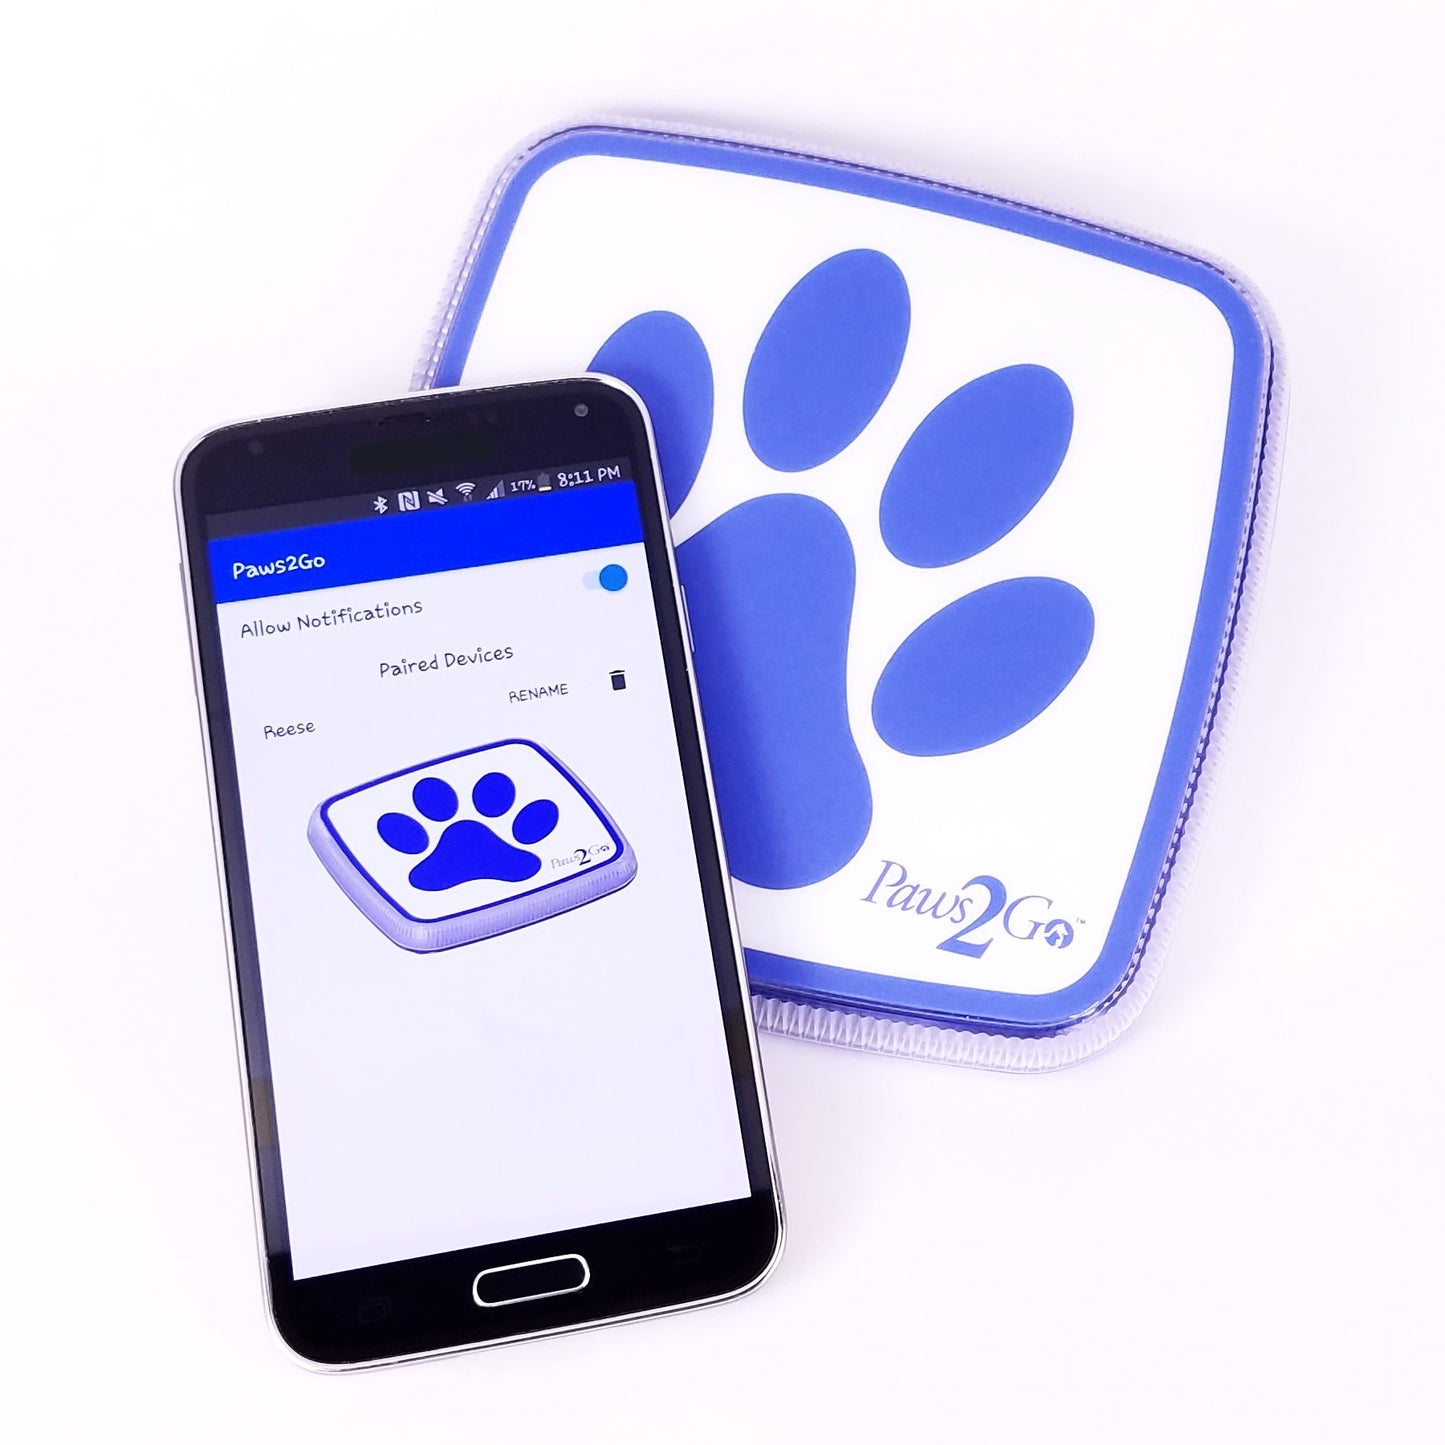 Paws2Go device with a smartphone showing the potty alert app